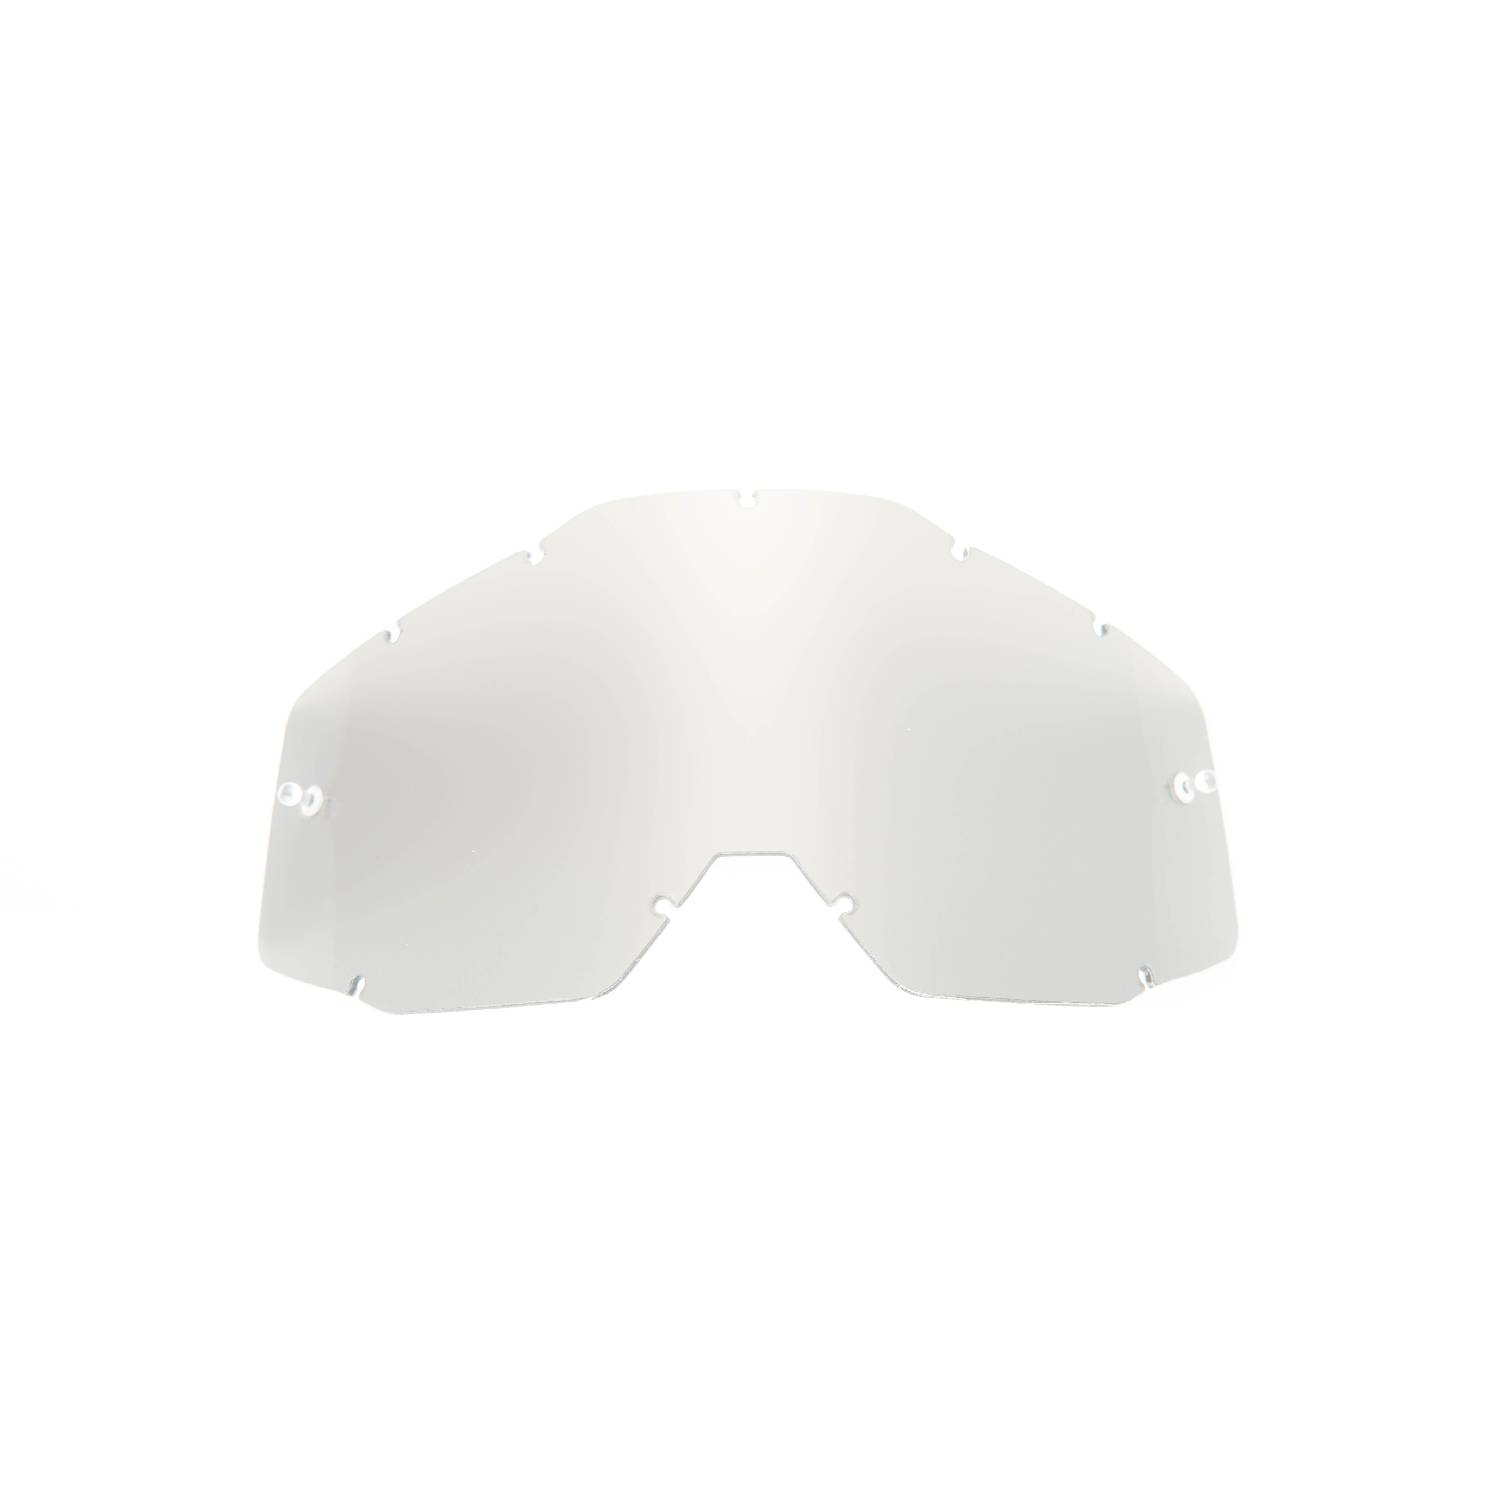 clear replacement lenses for goggles compatible for 100% Racecraft/Accuri/Strata PLUS goggle